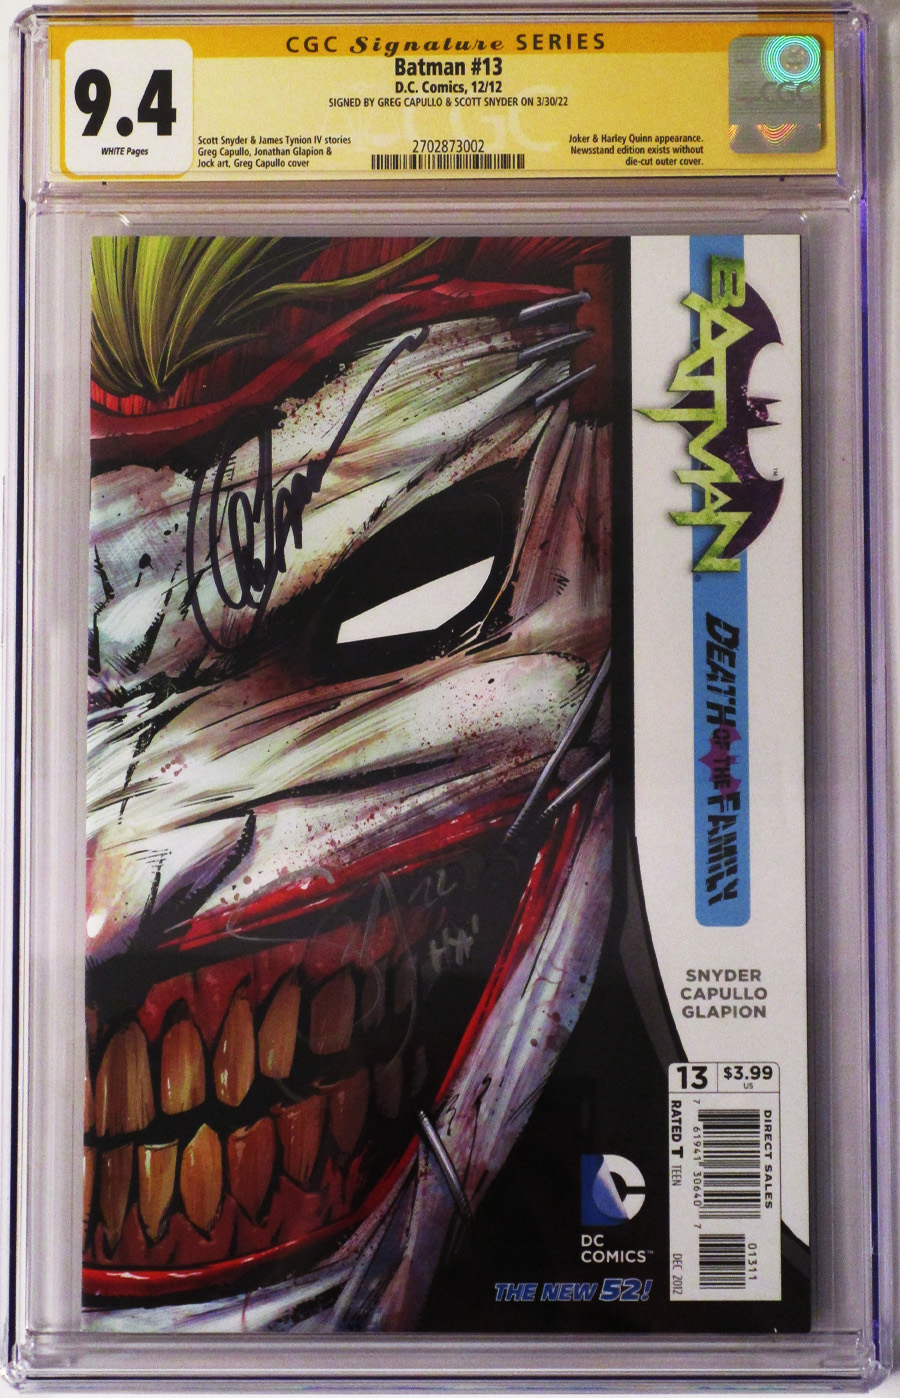 Batman Vol 2 #13 Cover J 1st Ptg Regular Greg Capullo Cover (Death Of The Family Tie-In) Signed By Scott Snyder and Greg Capullo CGC 9.4